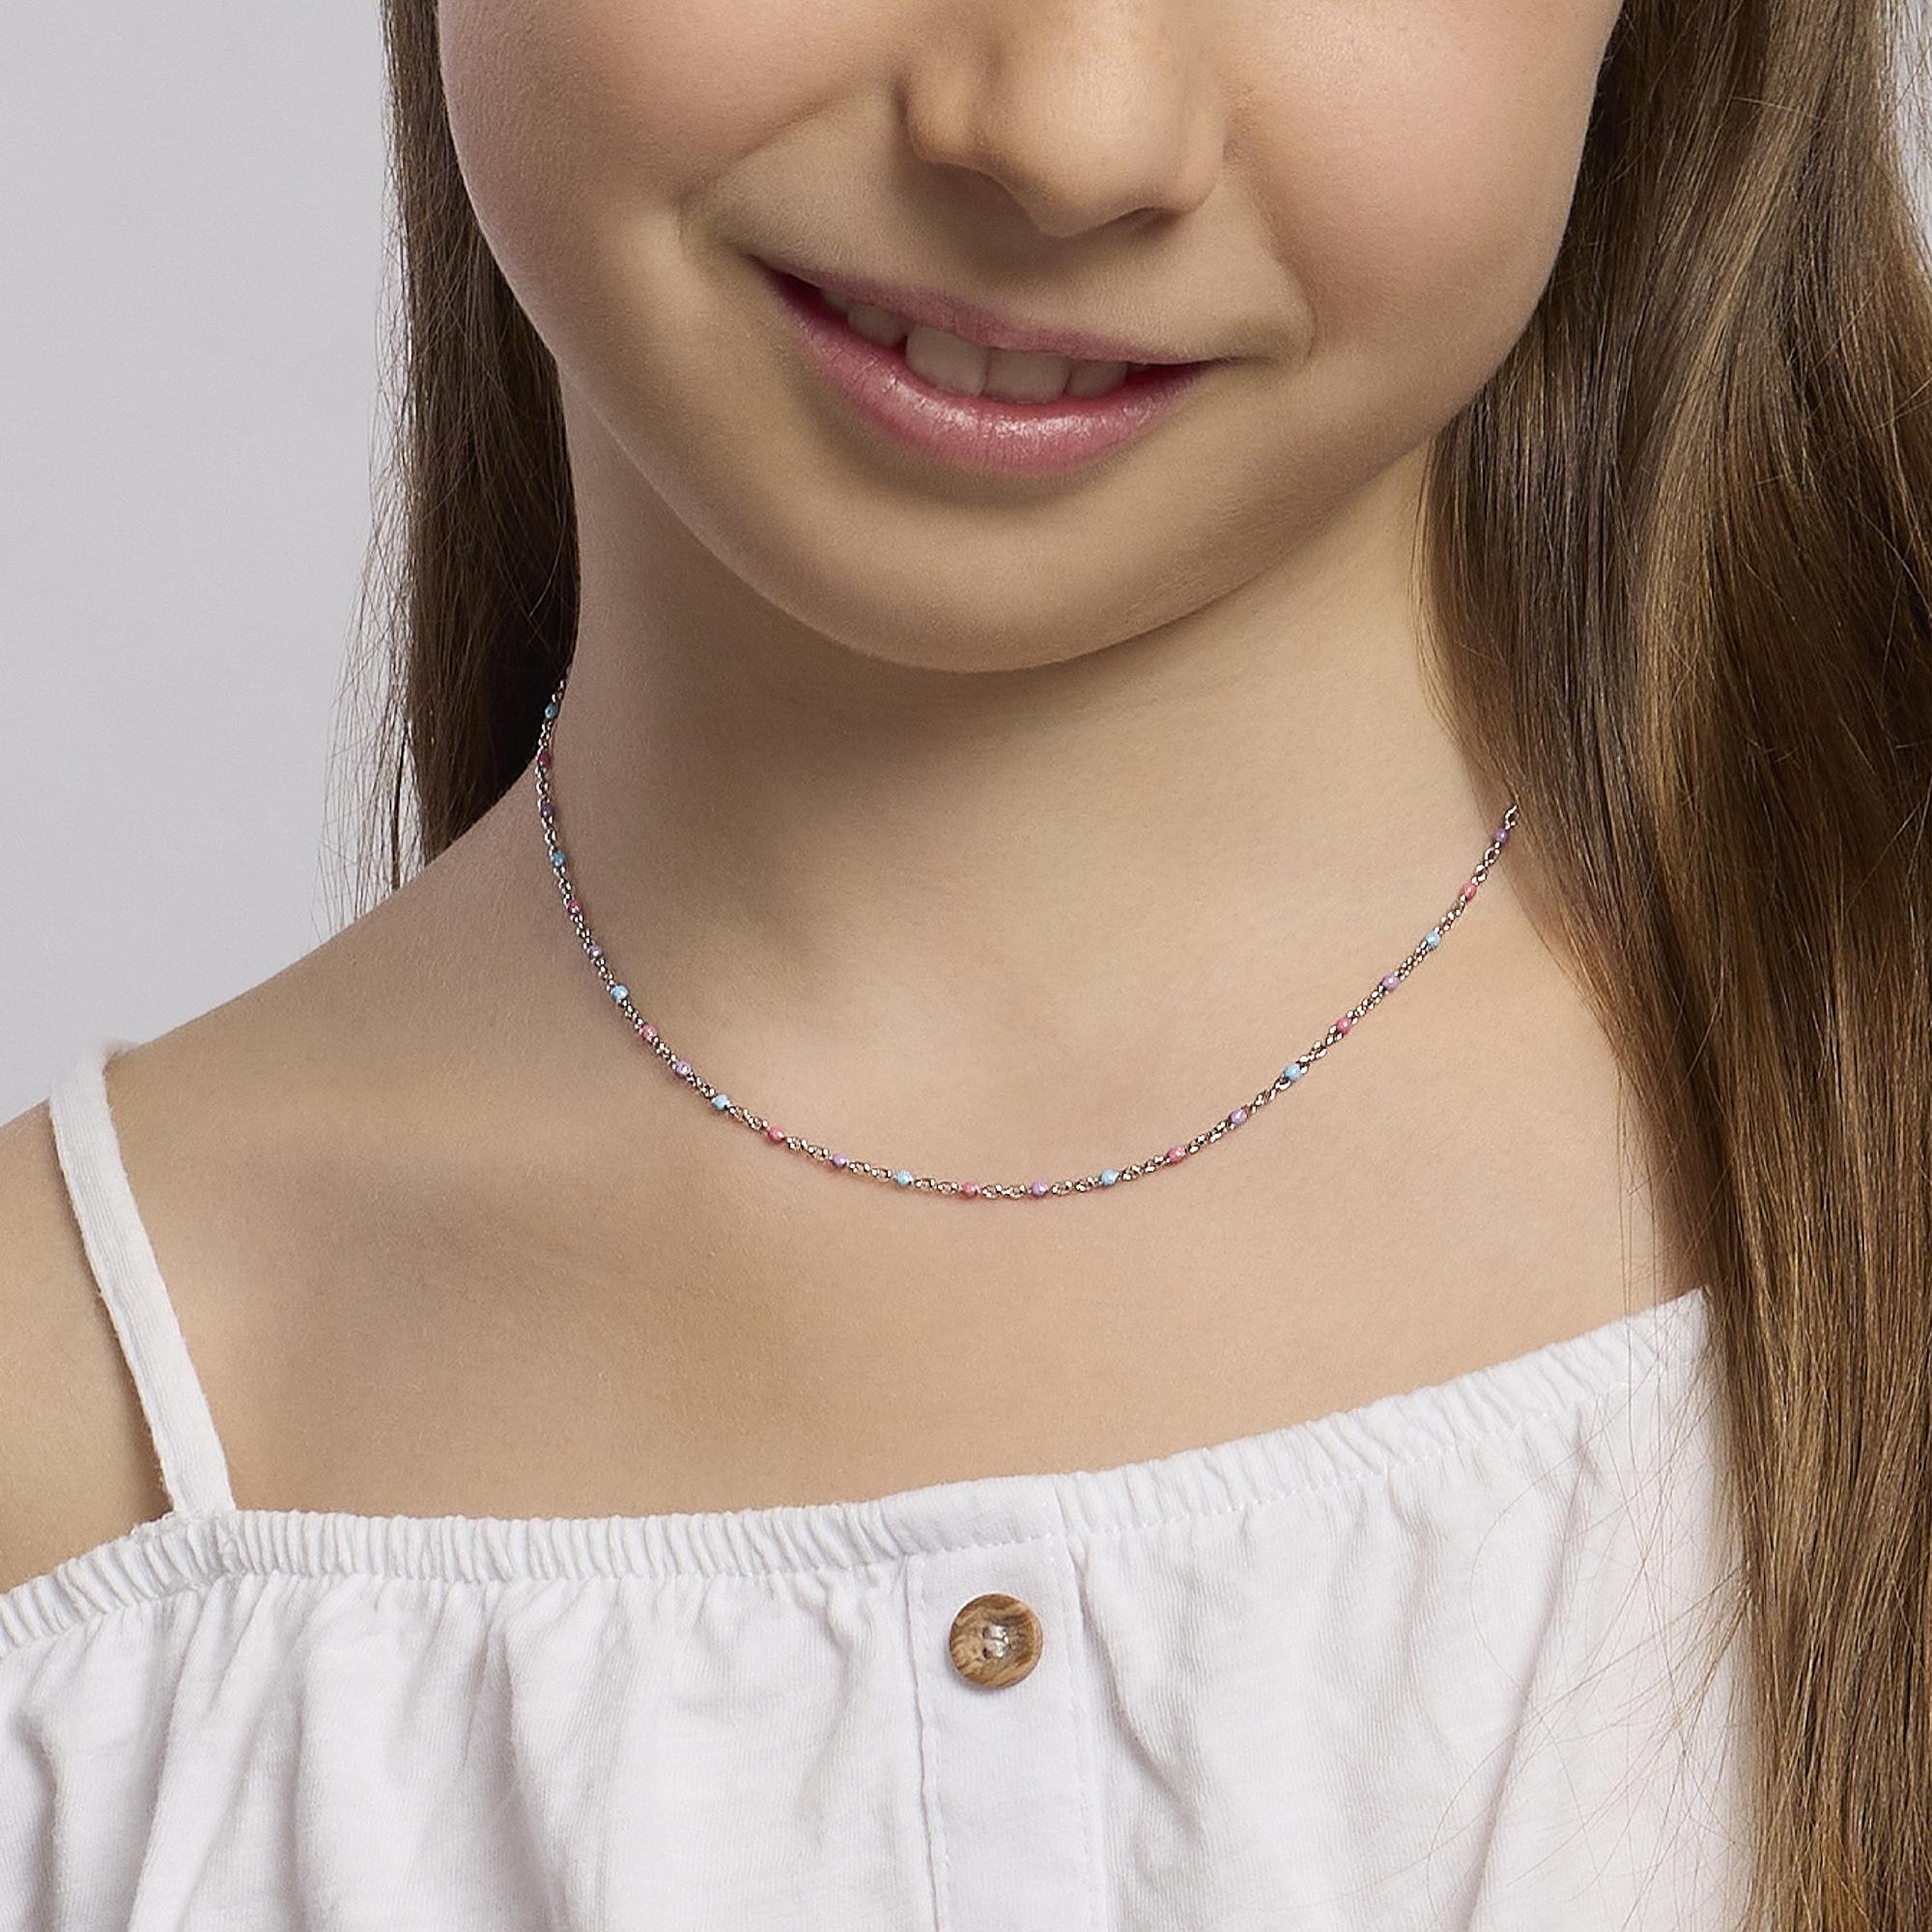 Mabina Junior - Silver choker with multicolor enamelled insertsCANDY - 553556